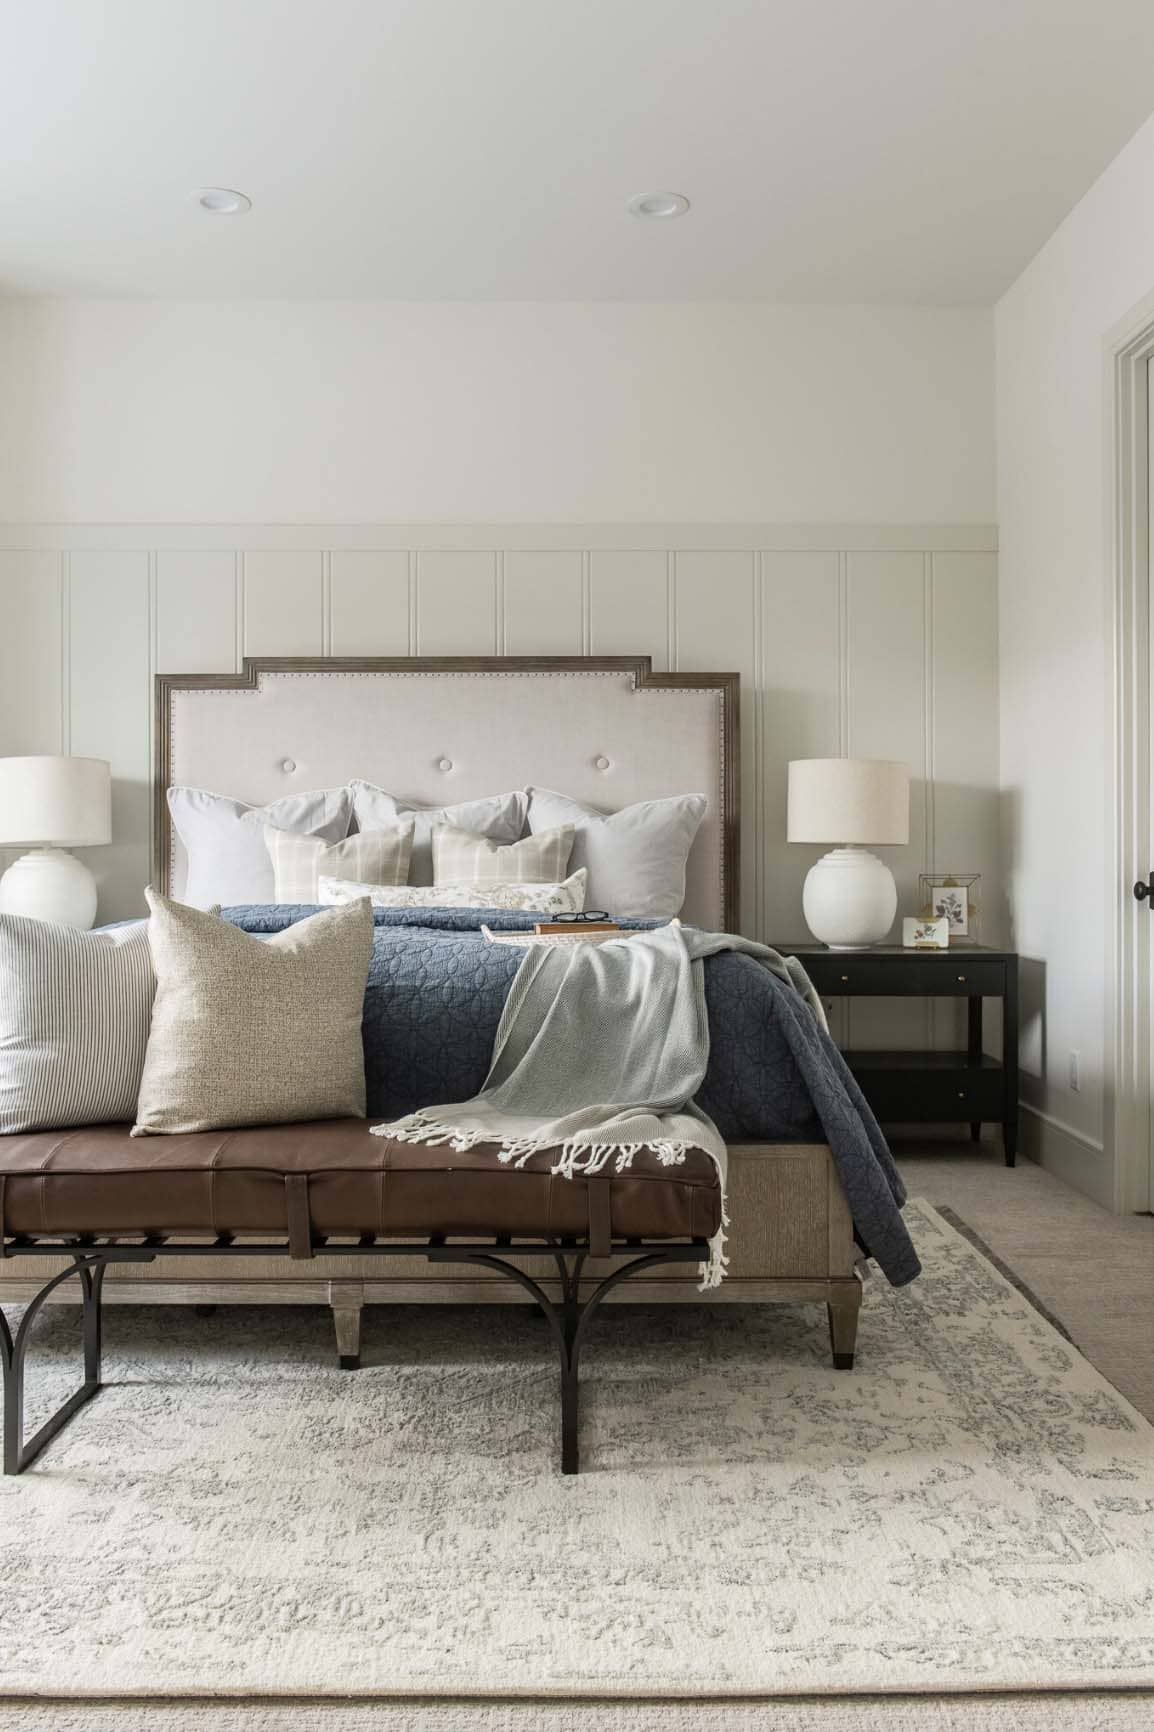 traditional farmhouse style bedroom